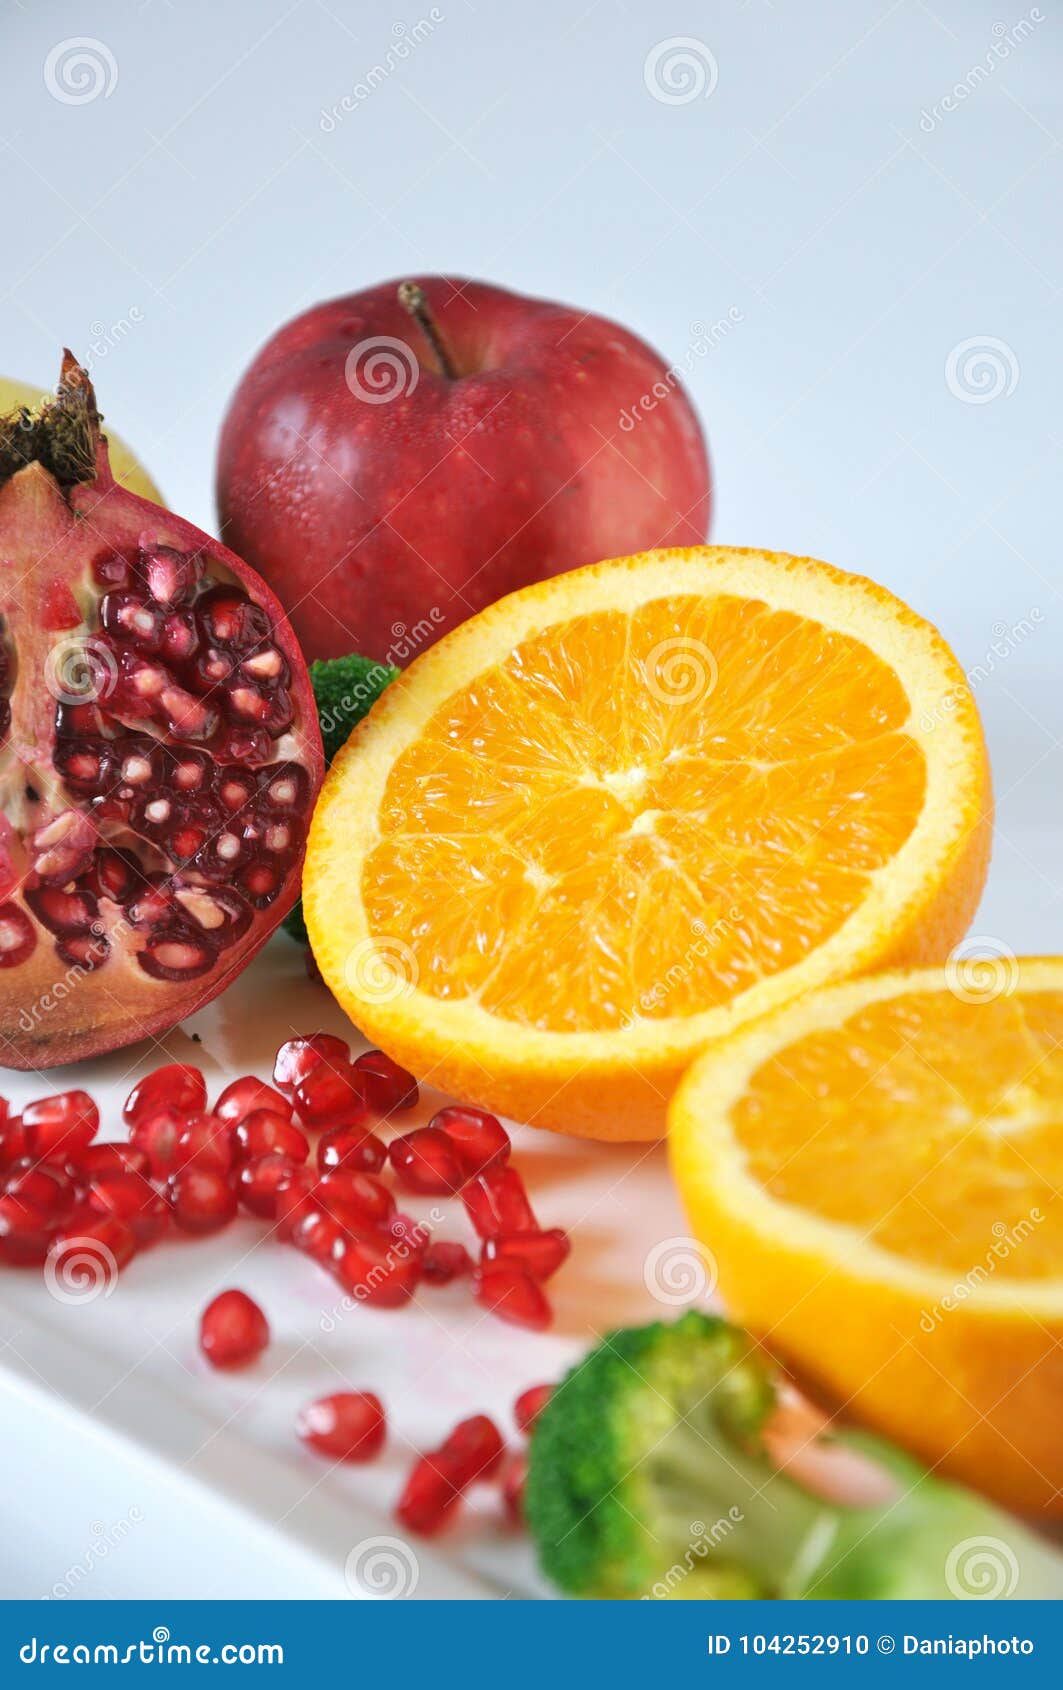 navel orange with pomegranate and red apple stock photo - image of